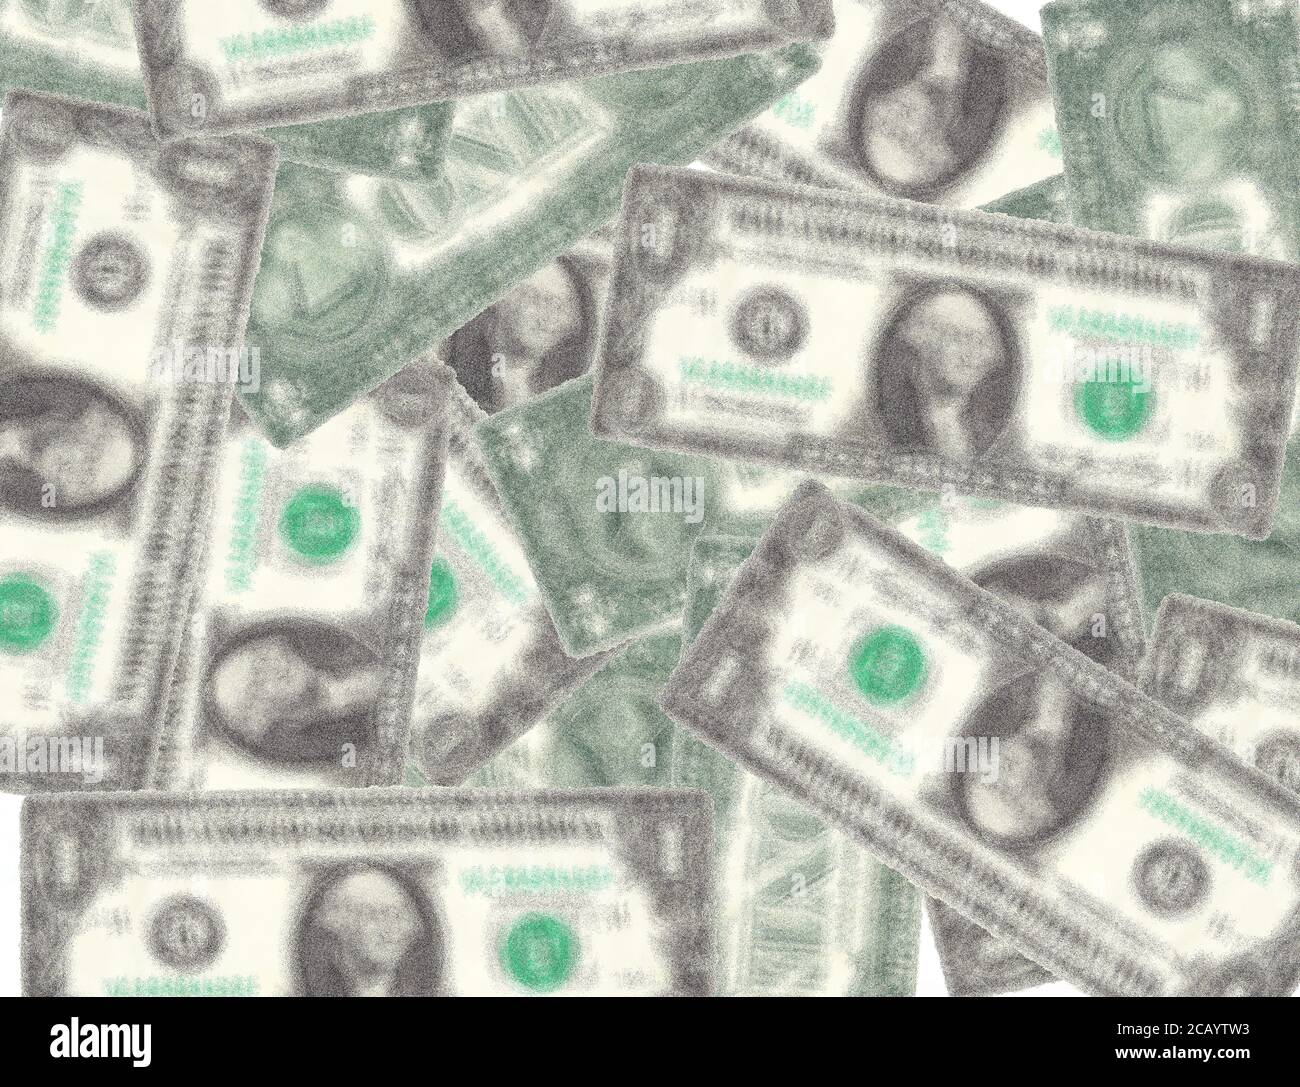 Background, wallpaper graphic collage of blurred US dollar bills, concept for money, finance, budget, debt, inflation Stock Photo